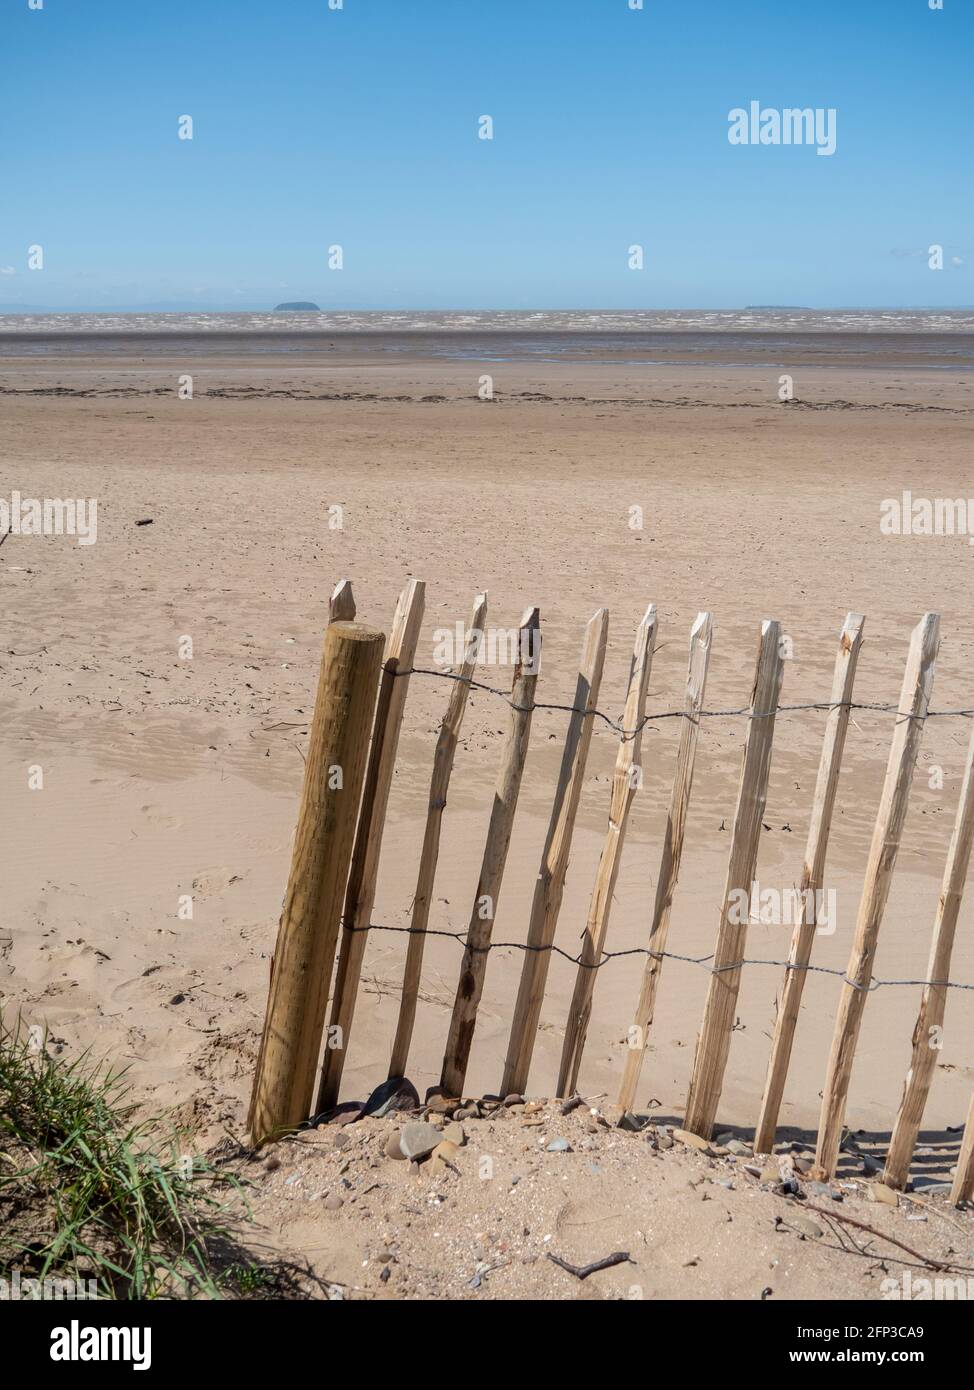 A beach fence at Sand Bay, near Weston-super-Mare, looking out towards the Bristol Channel and Steepholm Island. Stock Photo